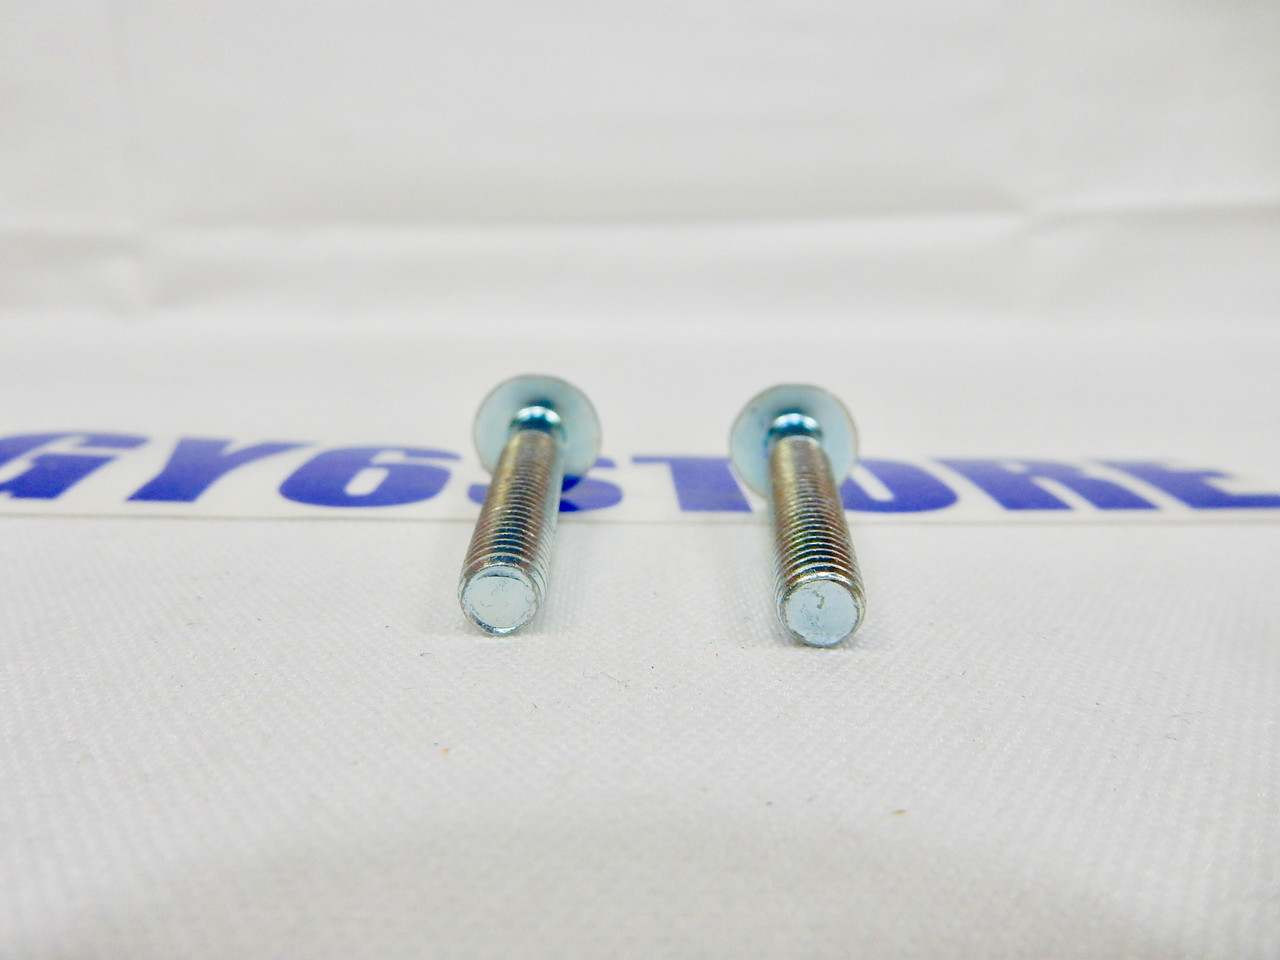 M6 x 35mm TRANSMISSION BOLTS FOR SCOOTERS WITH 150cc GY6 MOTORS *3 PACK*